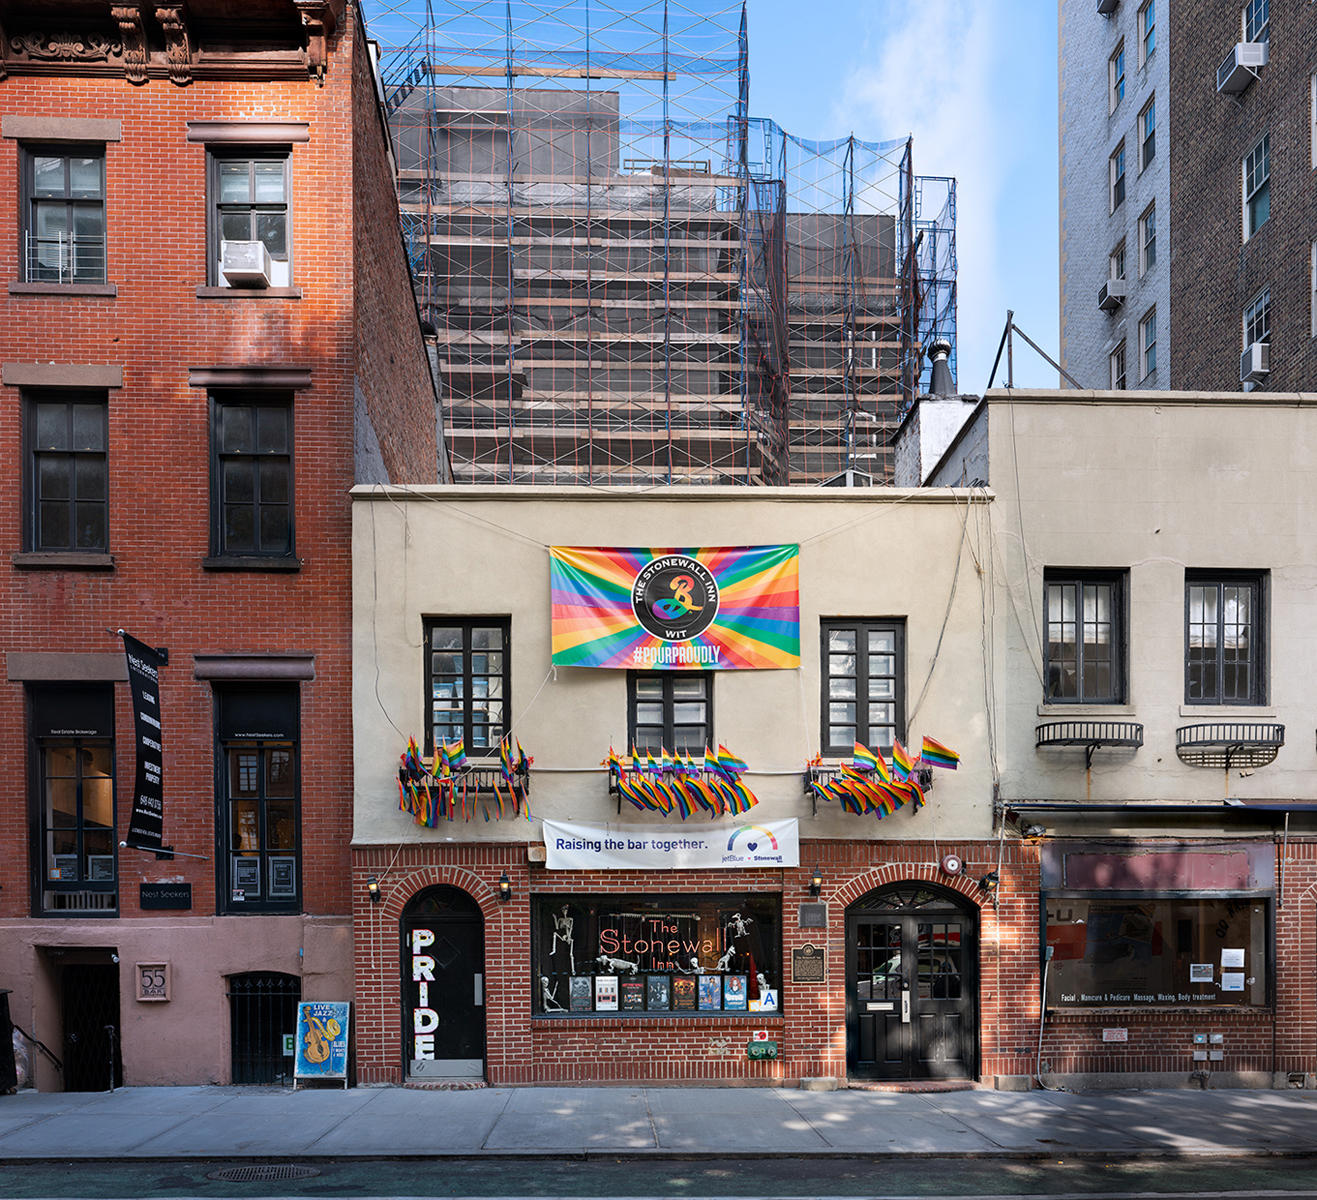 <div class="storycaption">
	<div class="galleryIntroTextArea holder">
		<div class="galleryIntroTextContent">
			<div class="galleryIntroTextContentInside">
				<div class="frishhead">
					STONEWALL INN 
				</div>
				<div class="frishsubhead">
					NEW YORK CITY, NEW YORK 
				</div>
				<div class="frishtext">
					The Stonewall Inn in New York's Greenwich Village, site of the 1969 riots that launched the gay rights movement. A violent police raid in the early morning hours of June 28, 1969 led to series of demonstrations by members of the gay community, an important event leading to the modern fight for LBGTQ rights in the United States. Very few establishments welcomed openly gay people in the 1950s and 1960s. Those that did were often bars. Gay Americans also faced an anti-gay legal system. The last years of the 1960s, were very contentious, as many social/political movements were active, including the civil rights movement and the anti-war movement. After the Stonewall riots, gays and lesbians in New York City faced gender, race, class, and generational obstacles to becoming a cohesive community. Within six months, two gay activist organizations were formed in New York, concentrating on confrontational tactics, and three newspapers were established to promote rights for gays and lesbians. 
					<div class="frishdate">
						PHOTOGRAPHED: 2018 
					</div>
				</div>
			</div>
		</div>
	</div>
</div> : IMAGES : Ghosts of Segregation